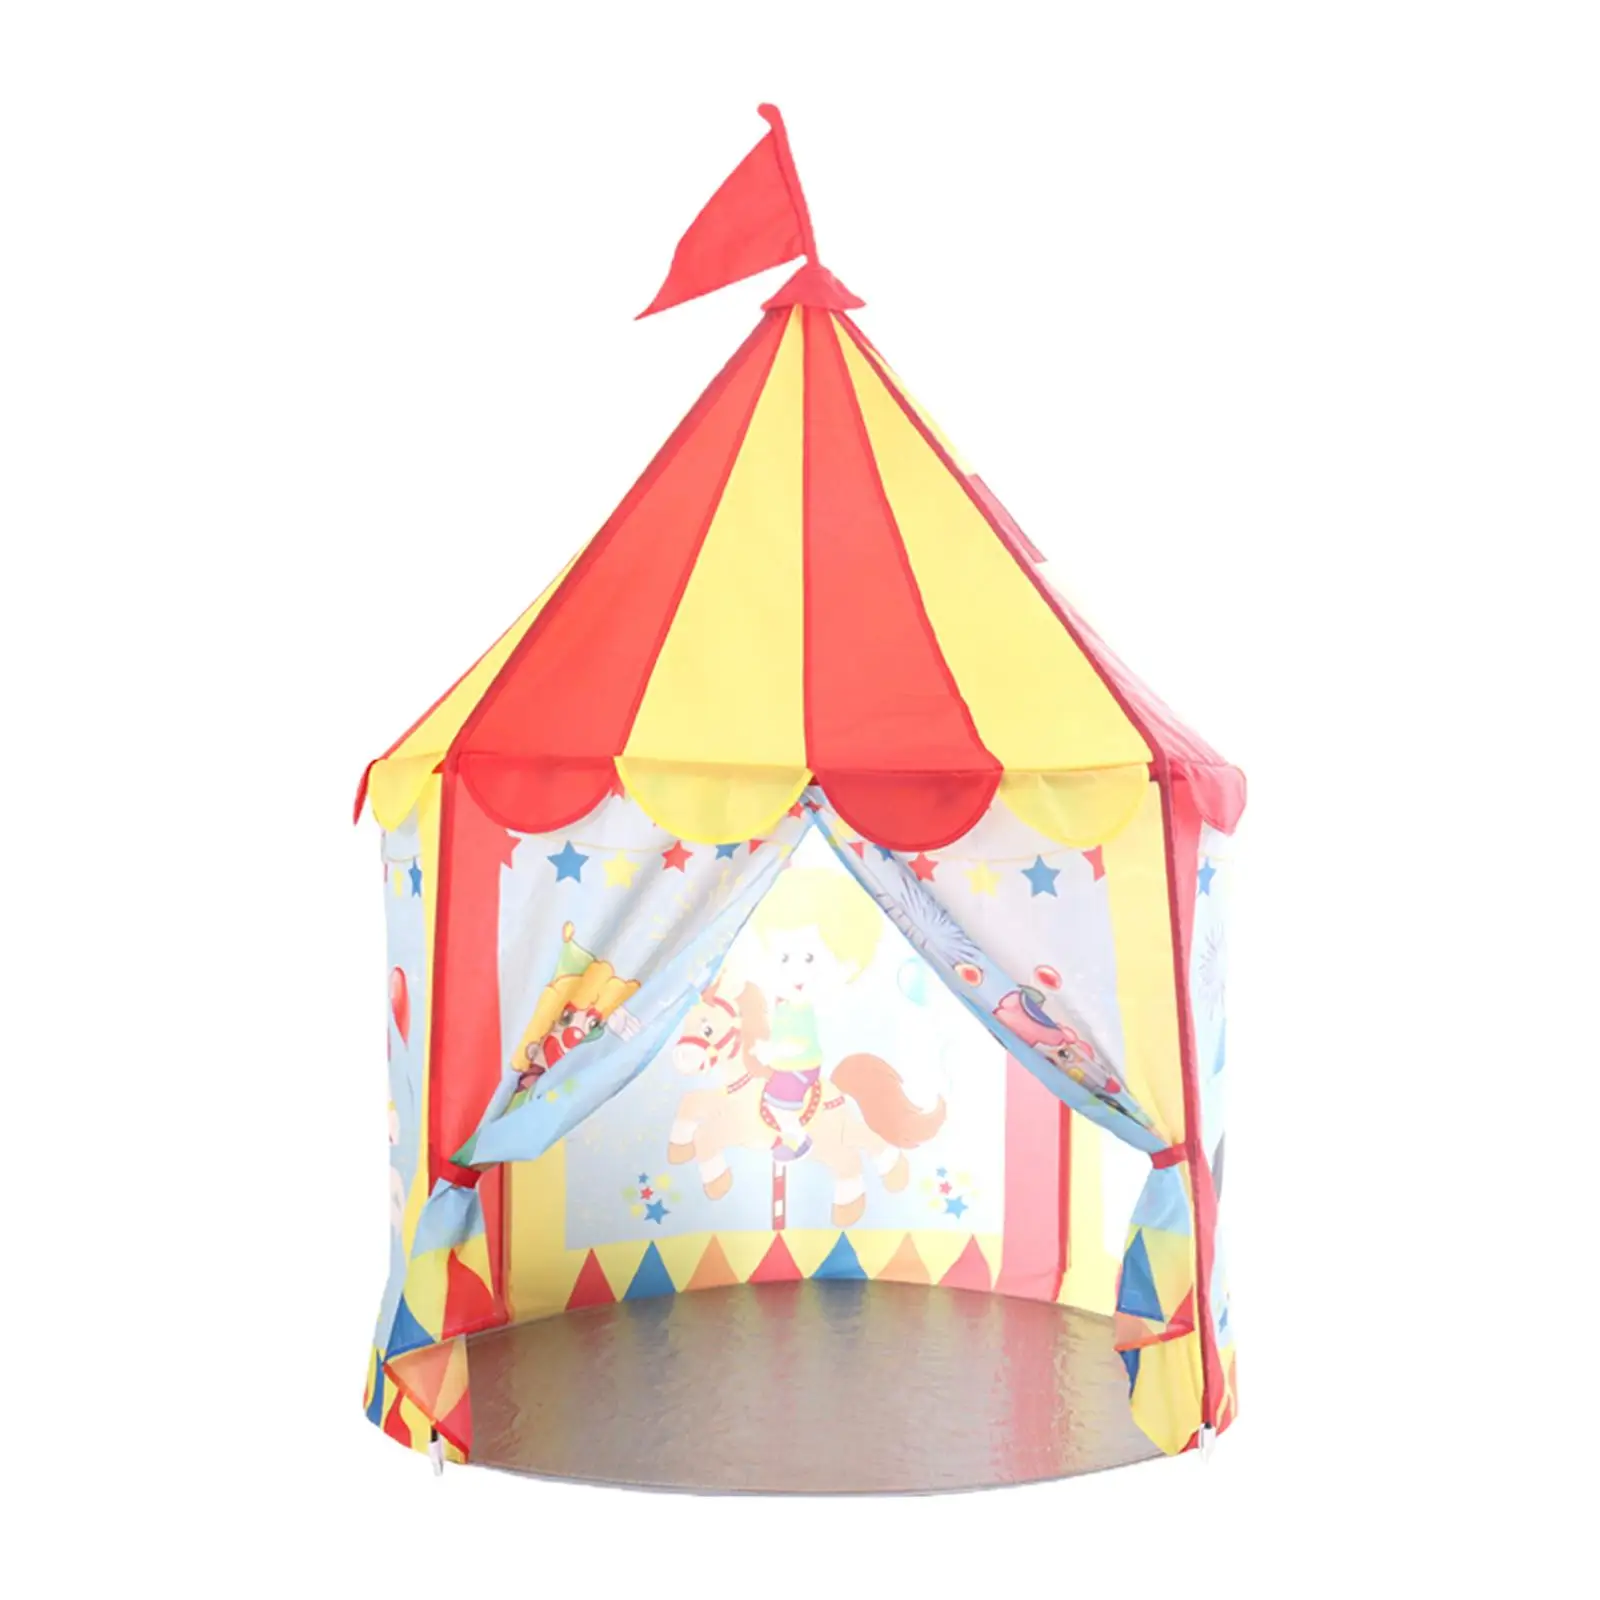 Kids Playhouse Play Teepee Foldable for Boys Girls Easy to Assemble Prince Castle Tent Play Tent for Home Garden Children Baby